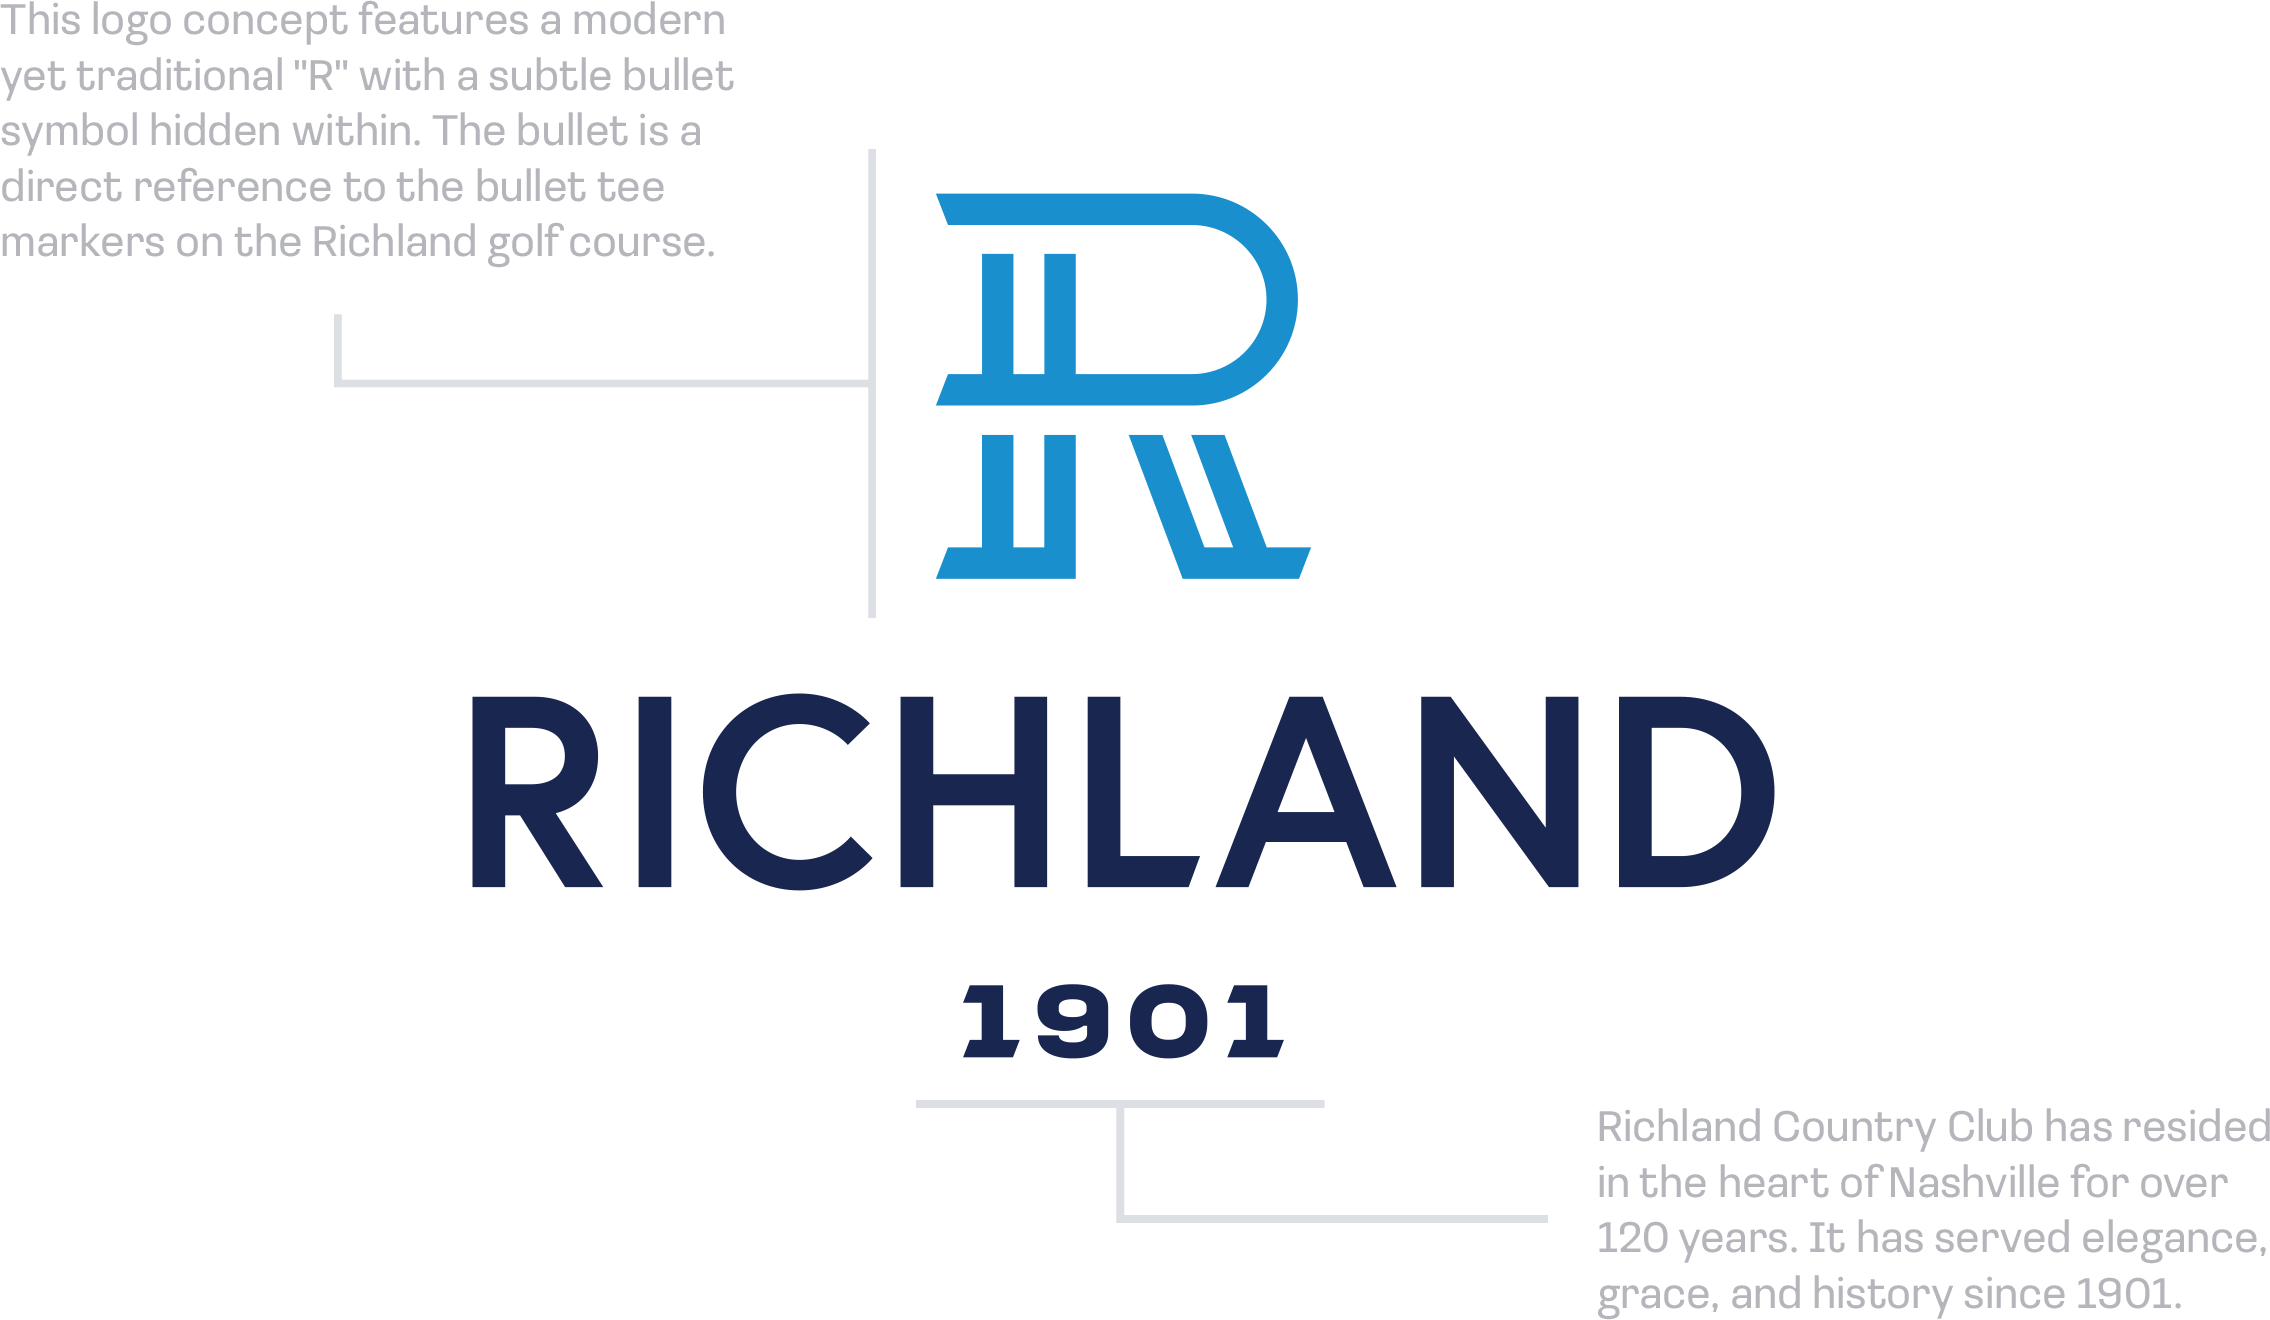 Richland Country Club main logo, two descriptor paragraphs are called to attention. They read: 